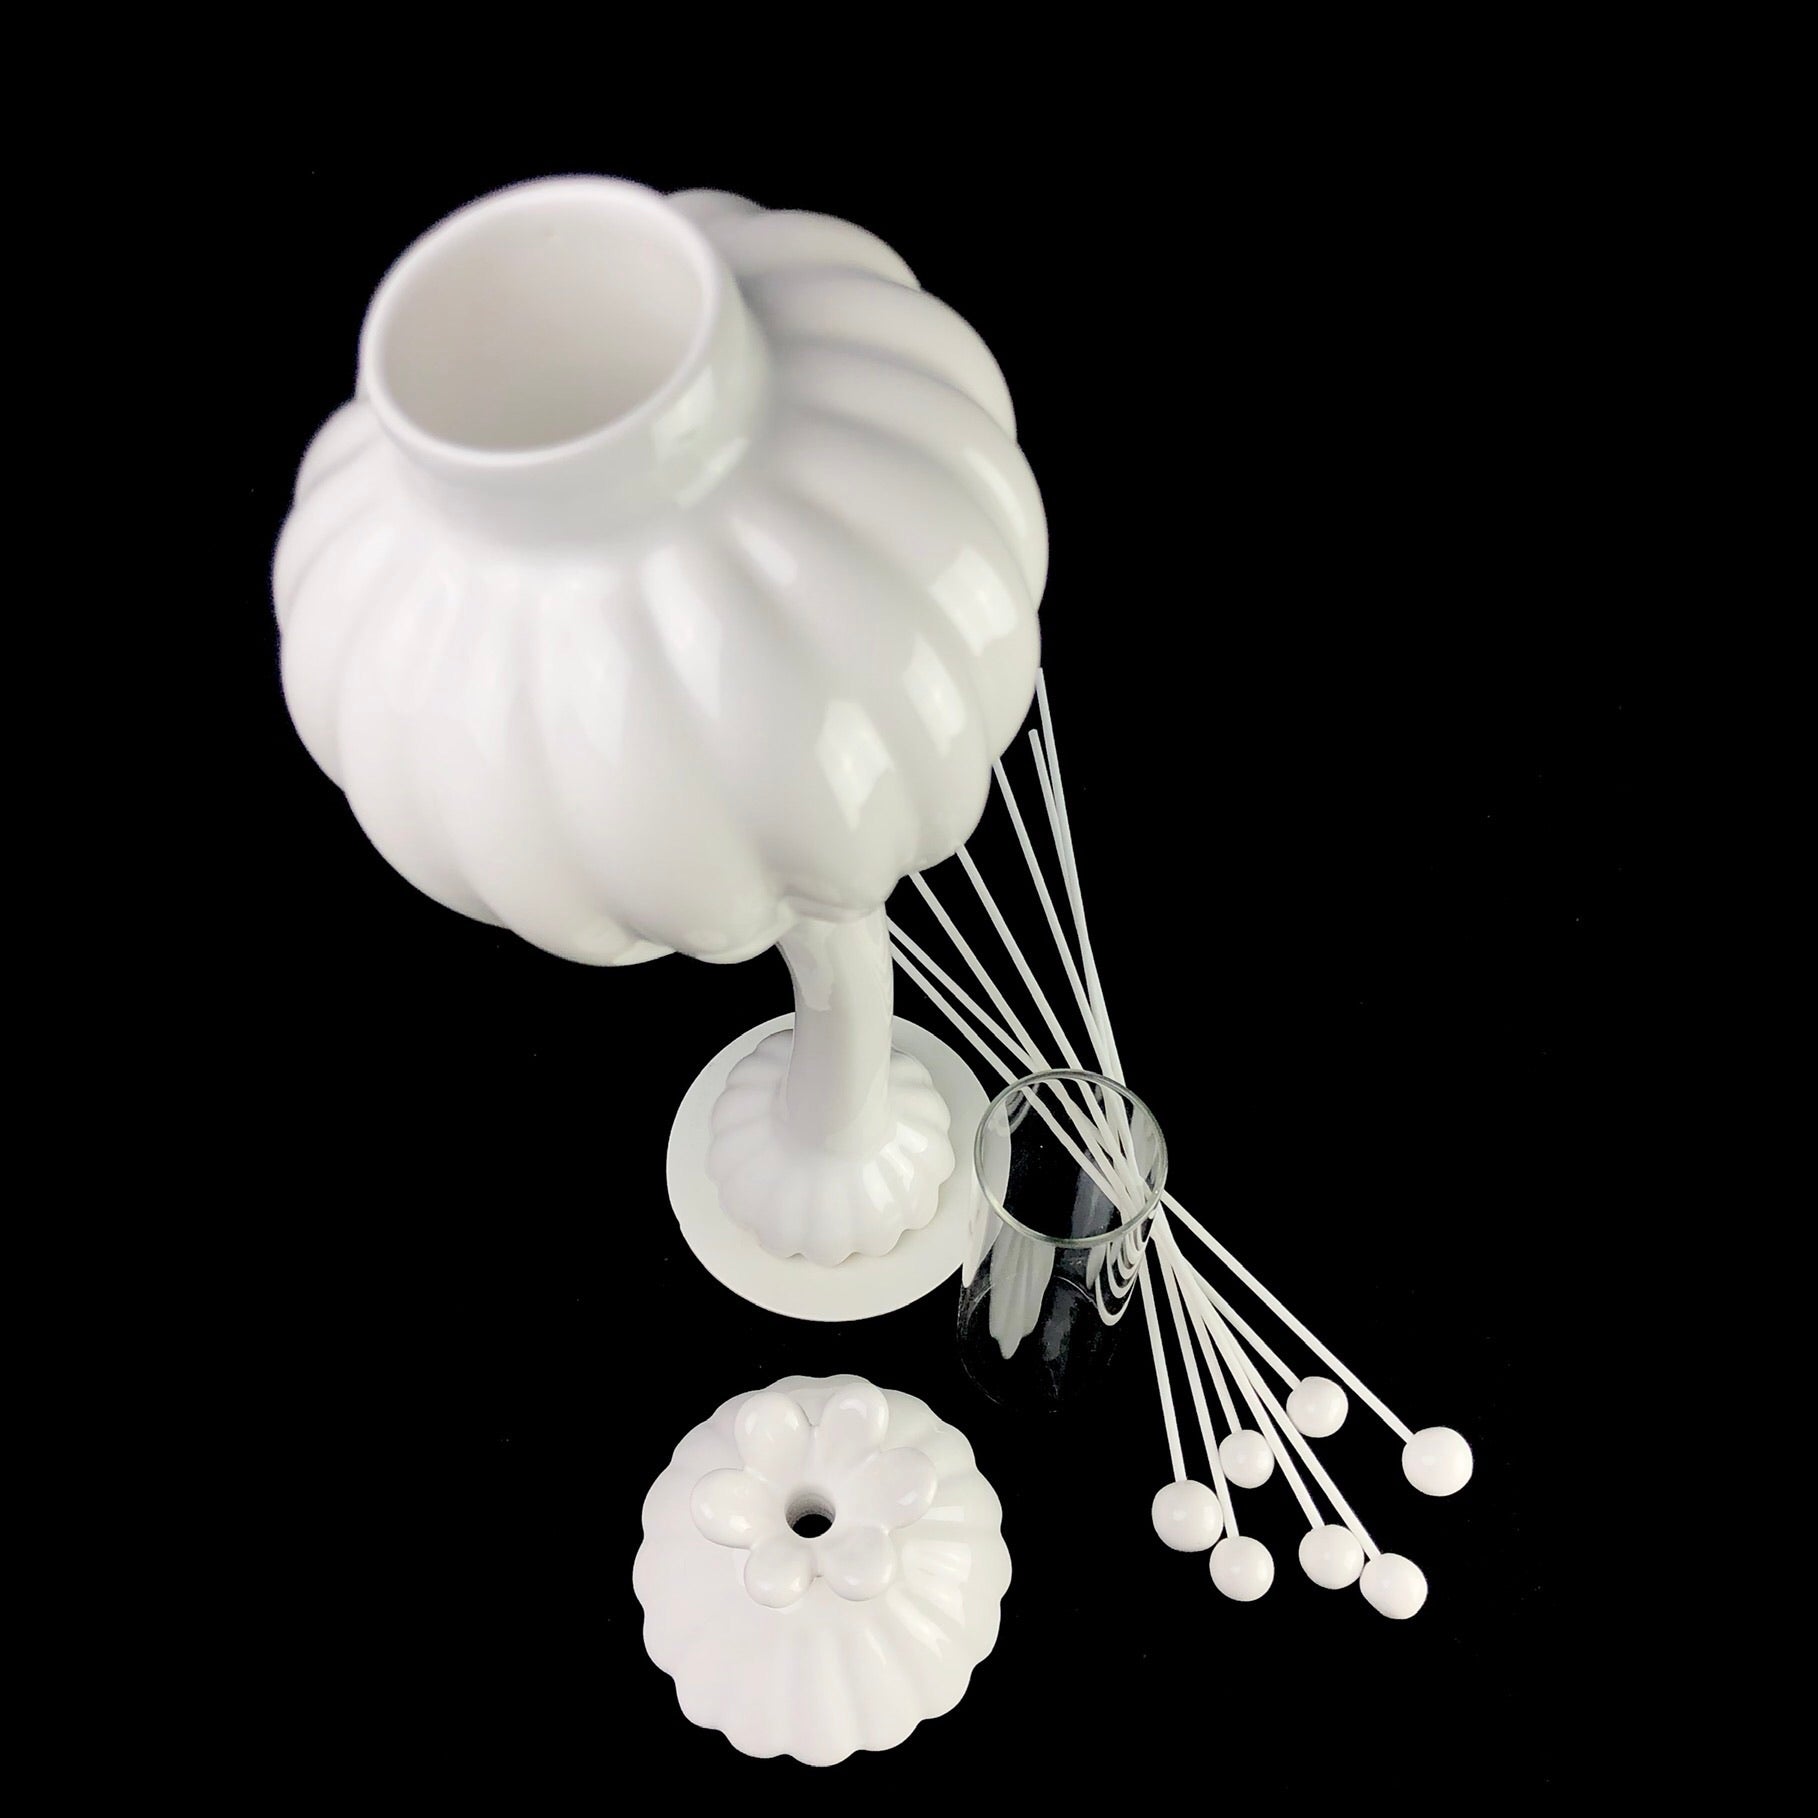 Components of Ceramic Flower Oil Diffuser